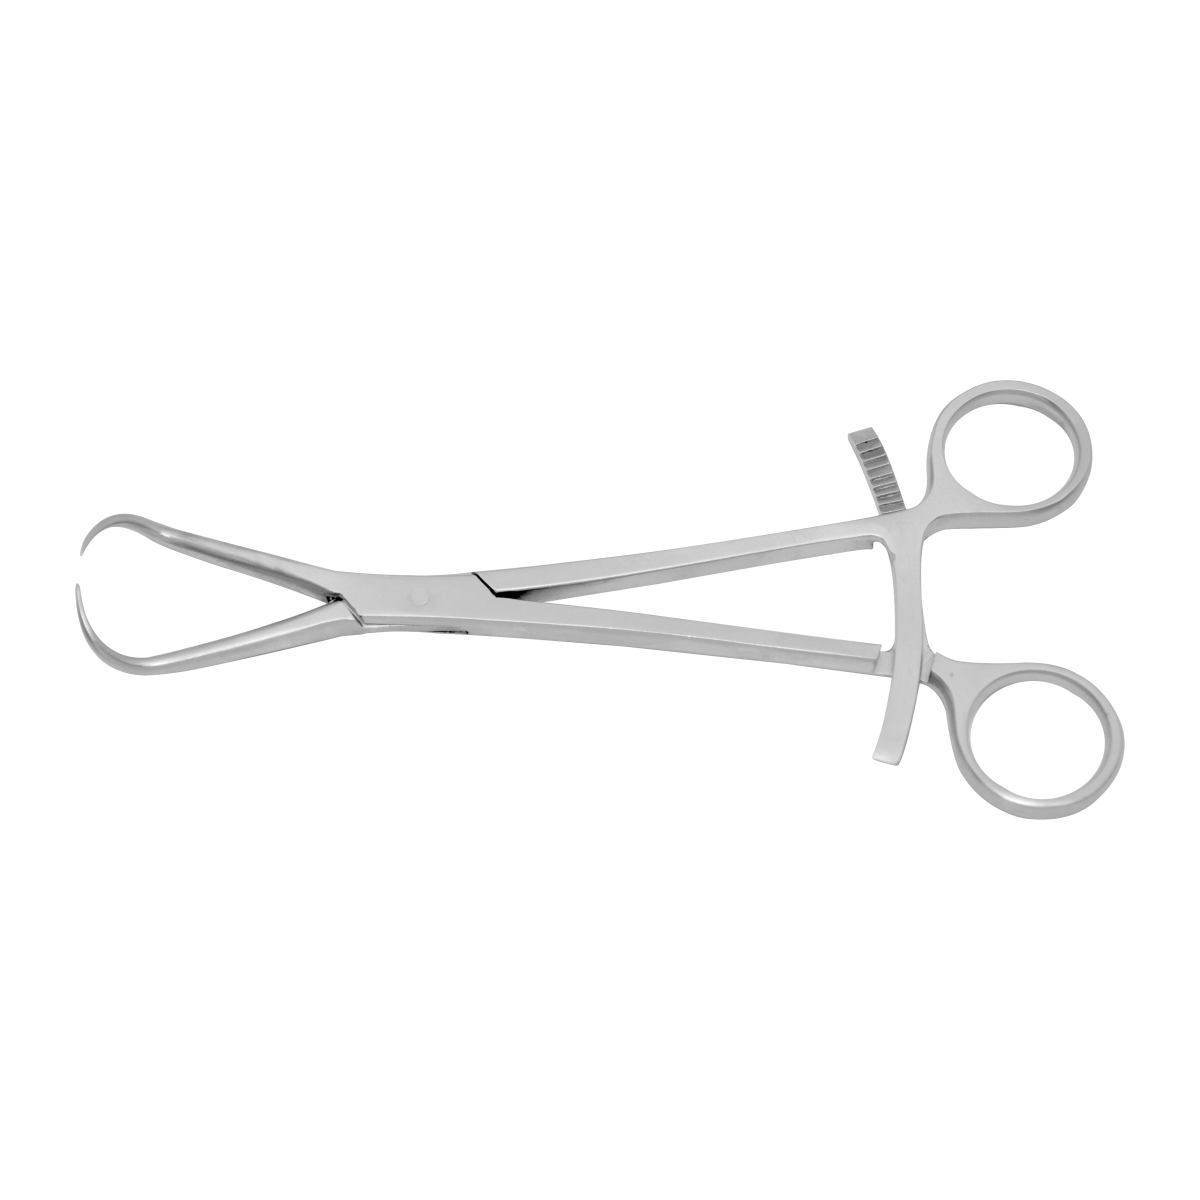 Reduction Forceps - Pointed Ratchet Lock - 180mm